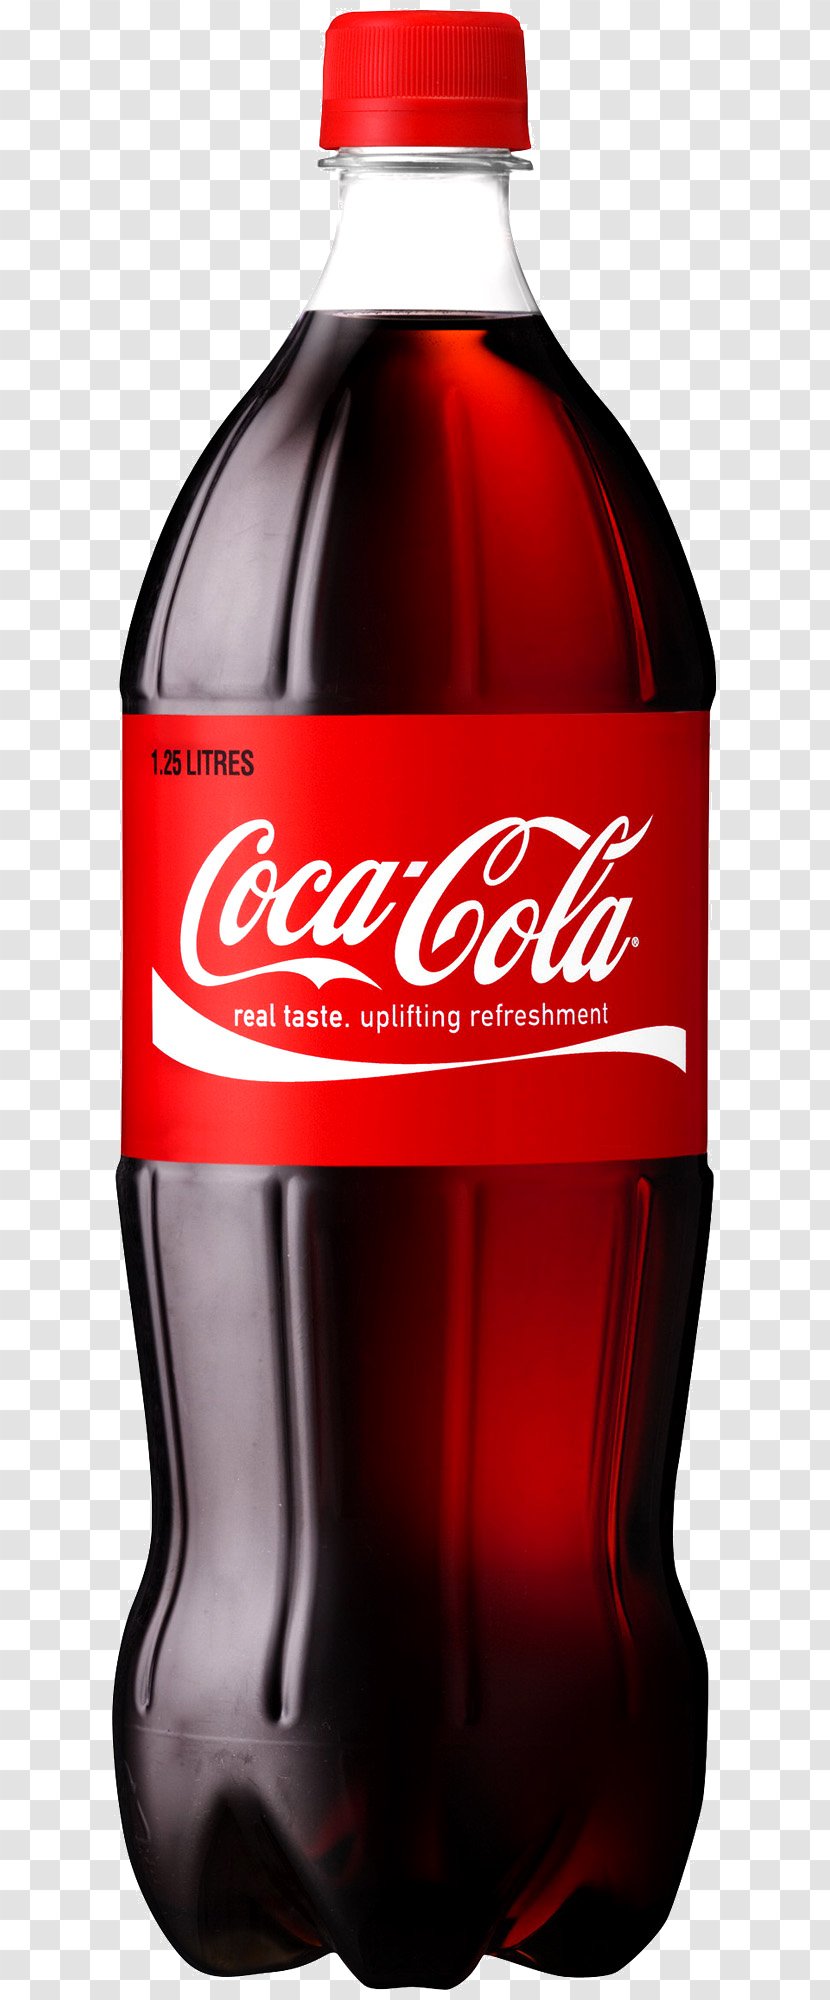 World Of Coca-Cola Soft Drink The Company - Coca Cola - Bottle Image Transparent PNG